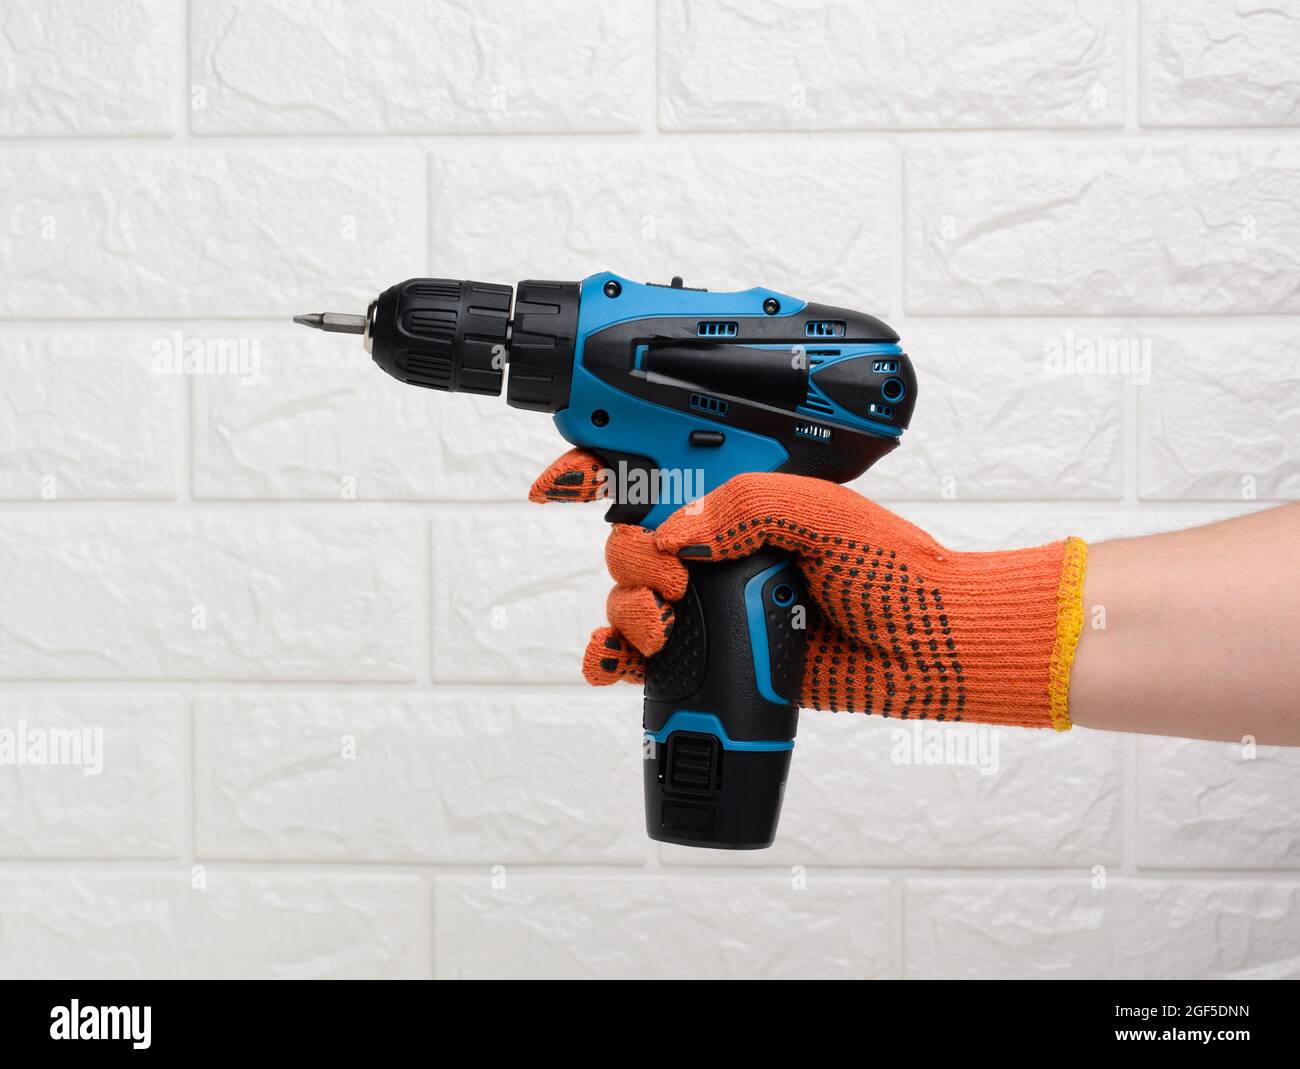 https://c8.alamy.com/comp/2GF5DNN/hand-in-a-textile-glove-holds-a-portable-drill-on-a-battery-against-a-background-of-a-white-brick-wall-2GF5DNN.jpg